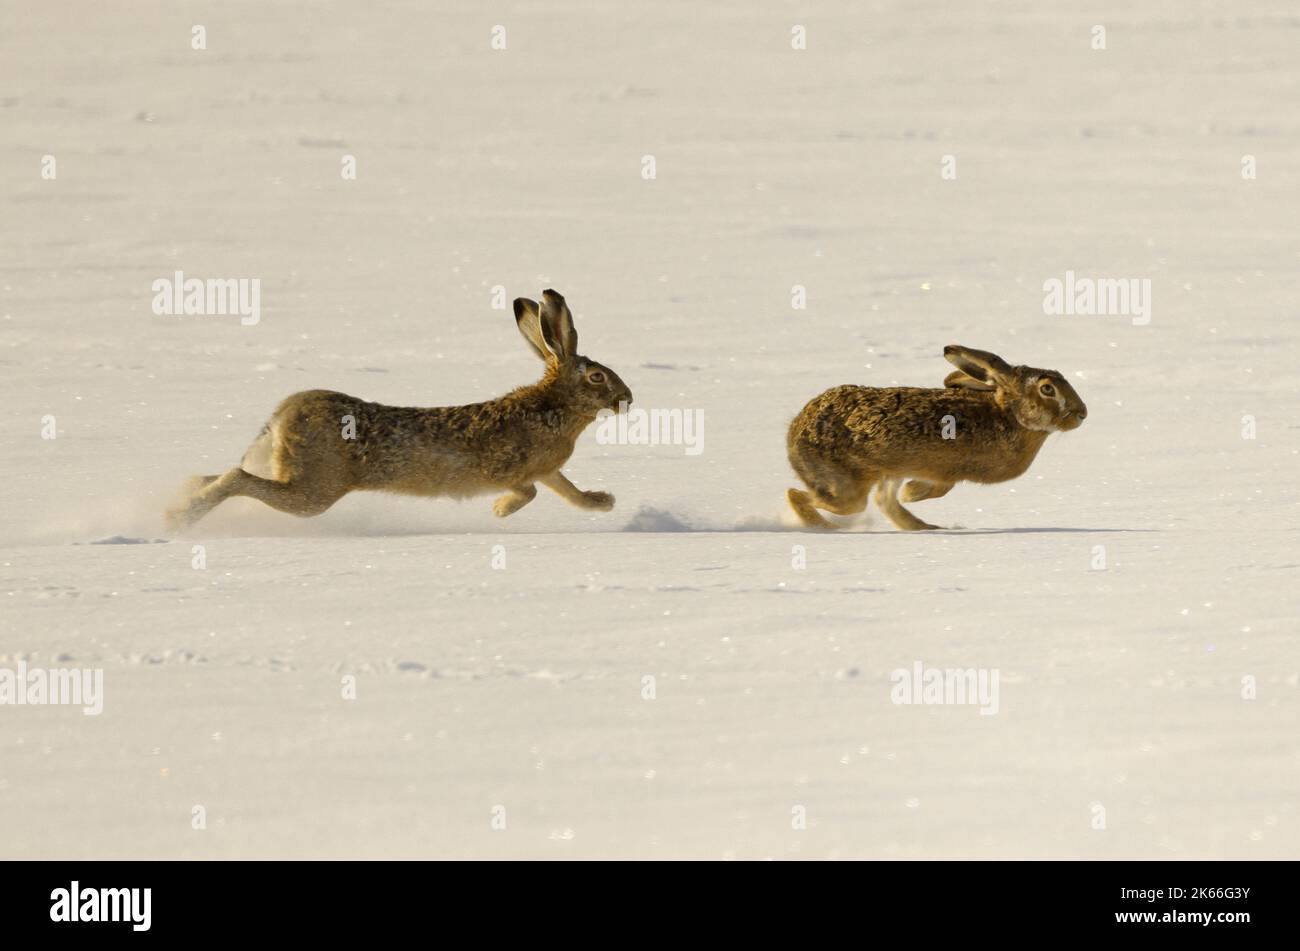 European hare, Brown hare (Lepus europaeus), two brown hares chasing each other on a snow-covered field, side view, Germany Stock Photo